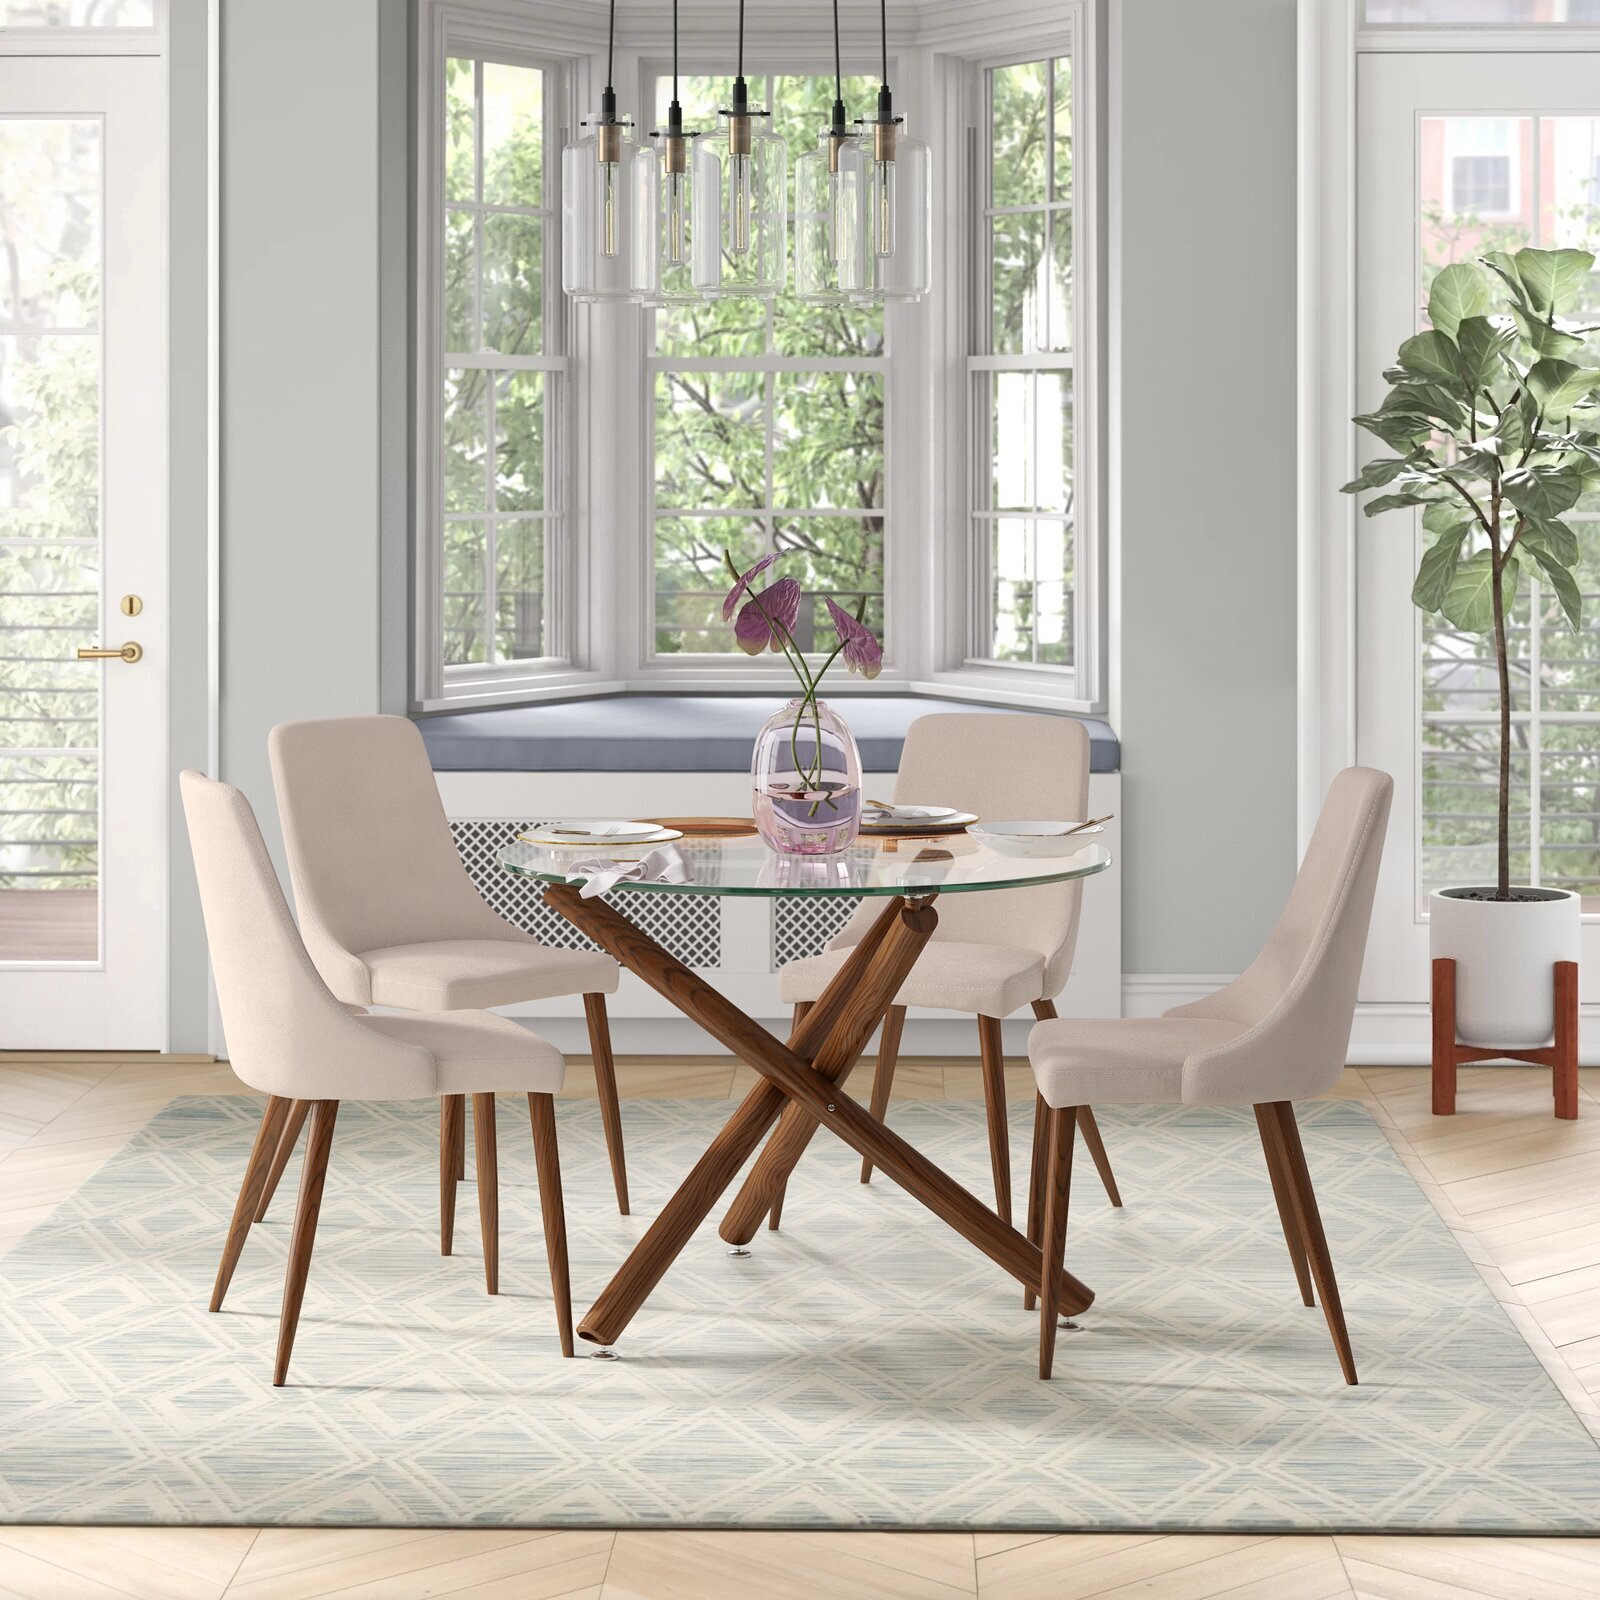 Glass dining table set in mid century modern style